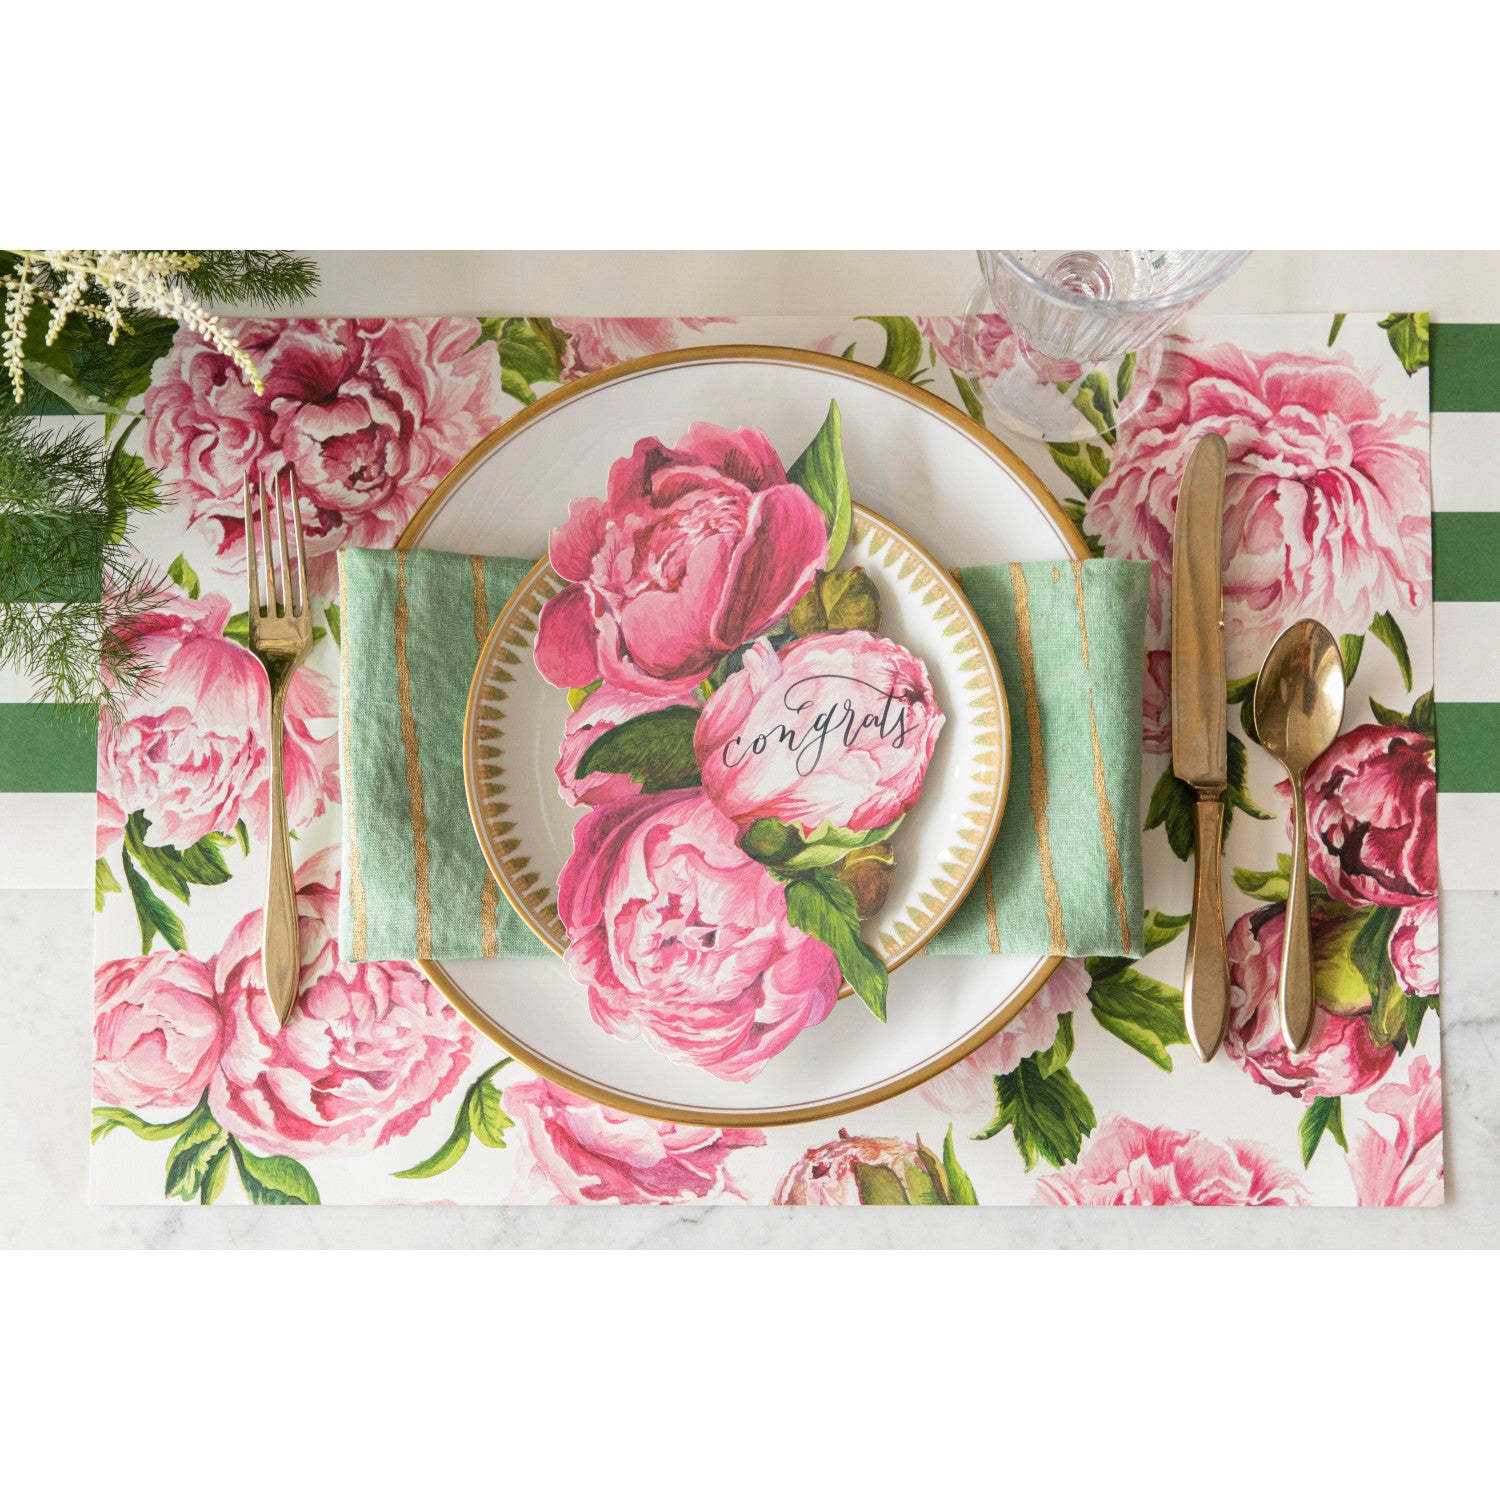 The Peonies In Bloom Placemat under an elegant place setting, from above.